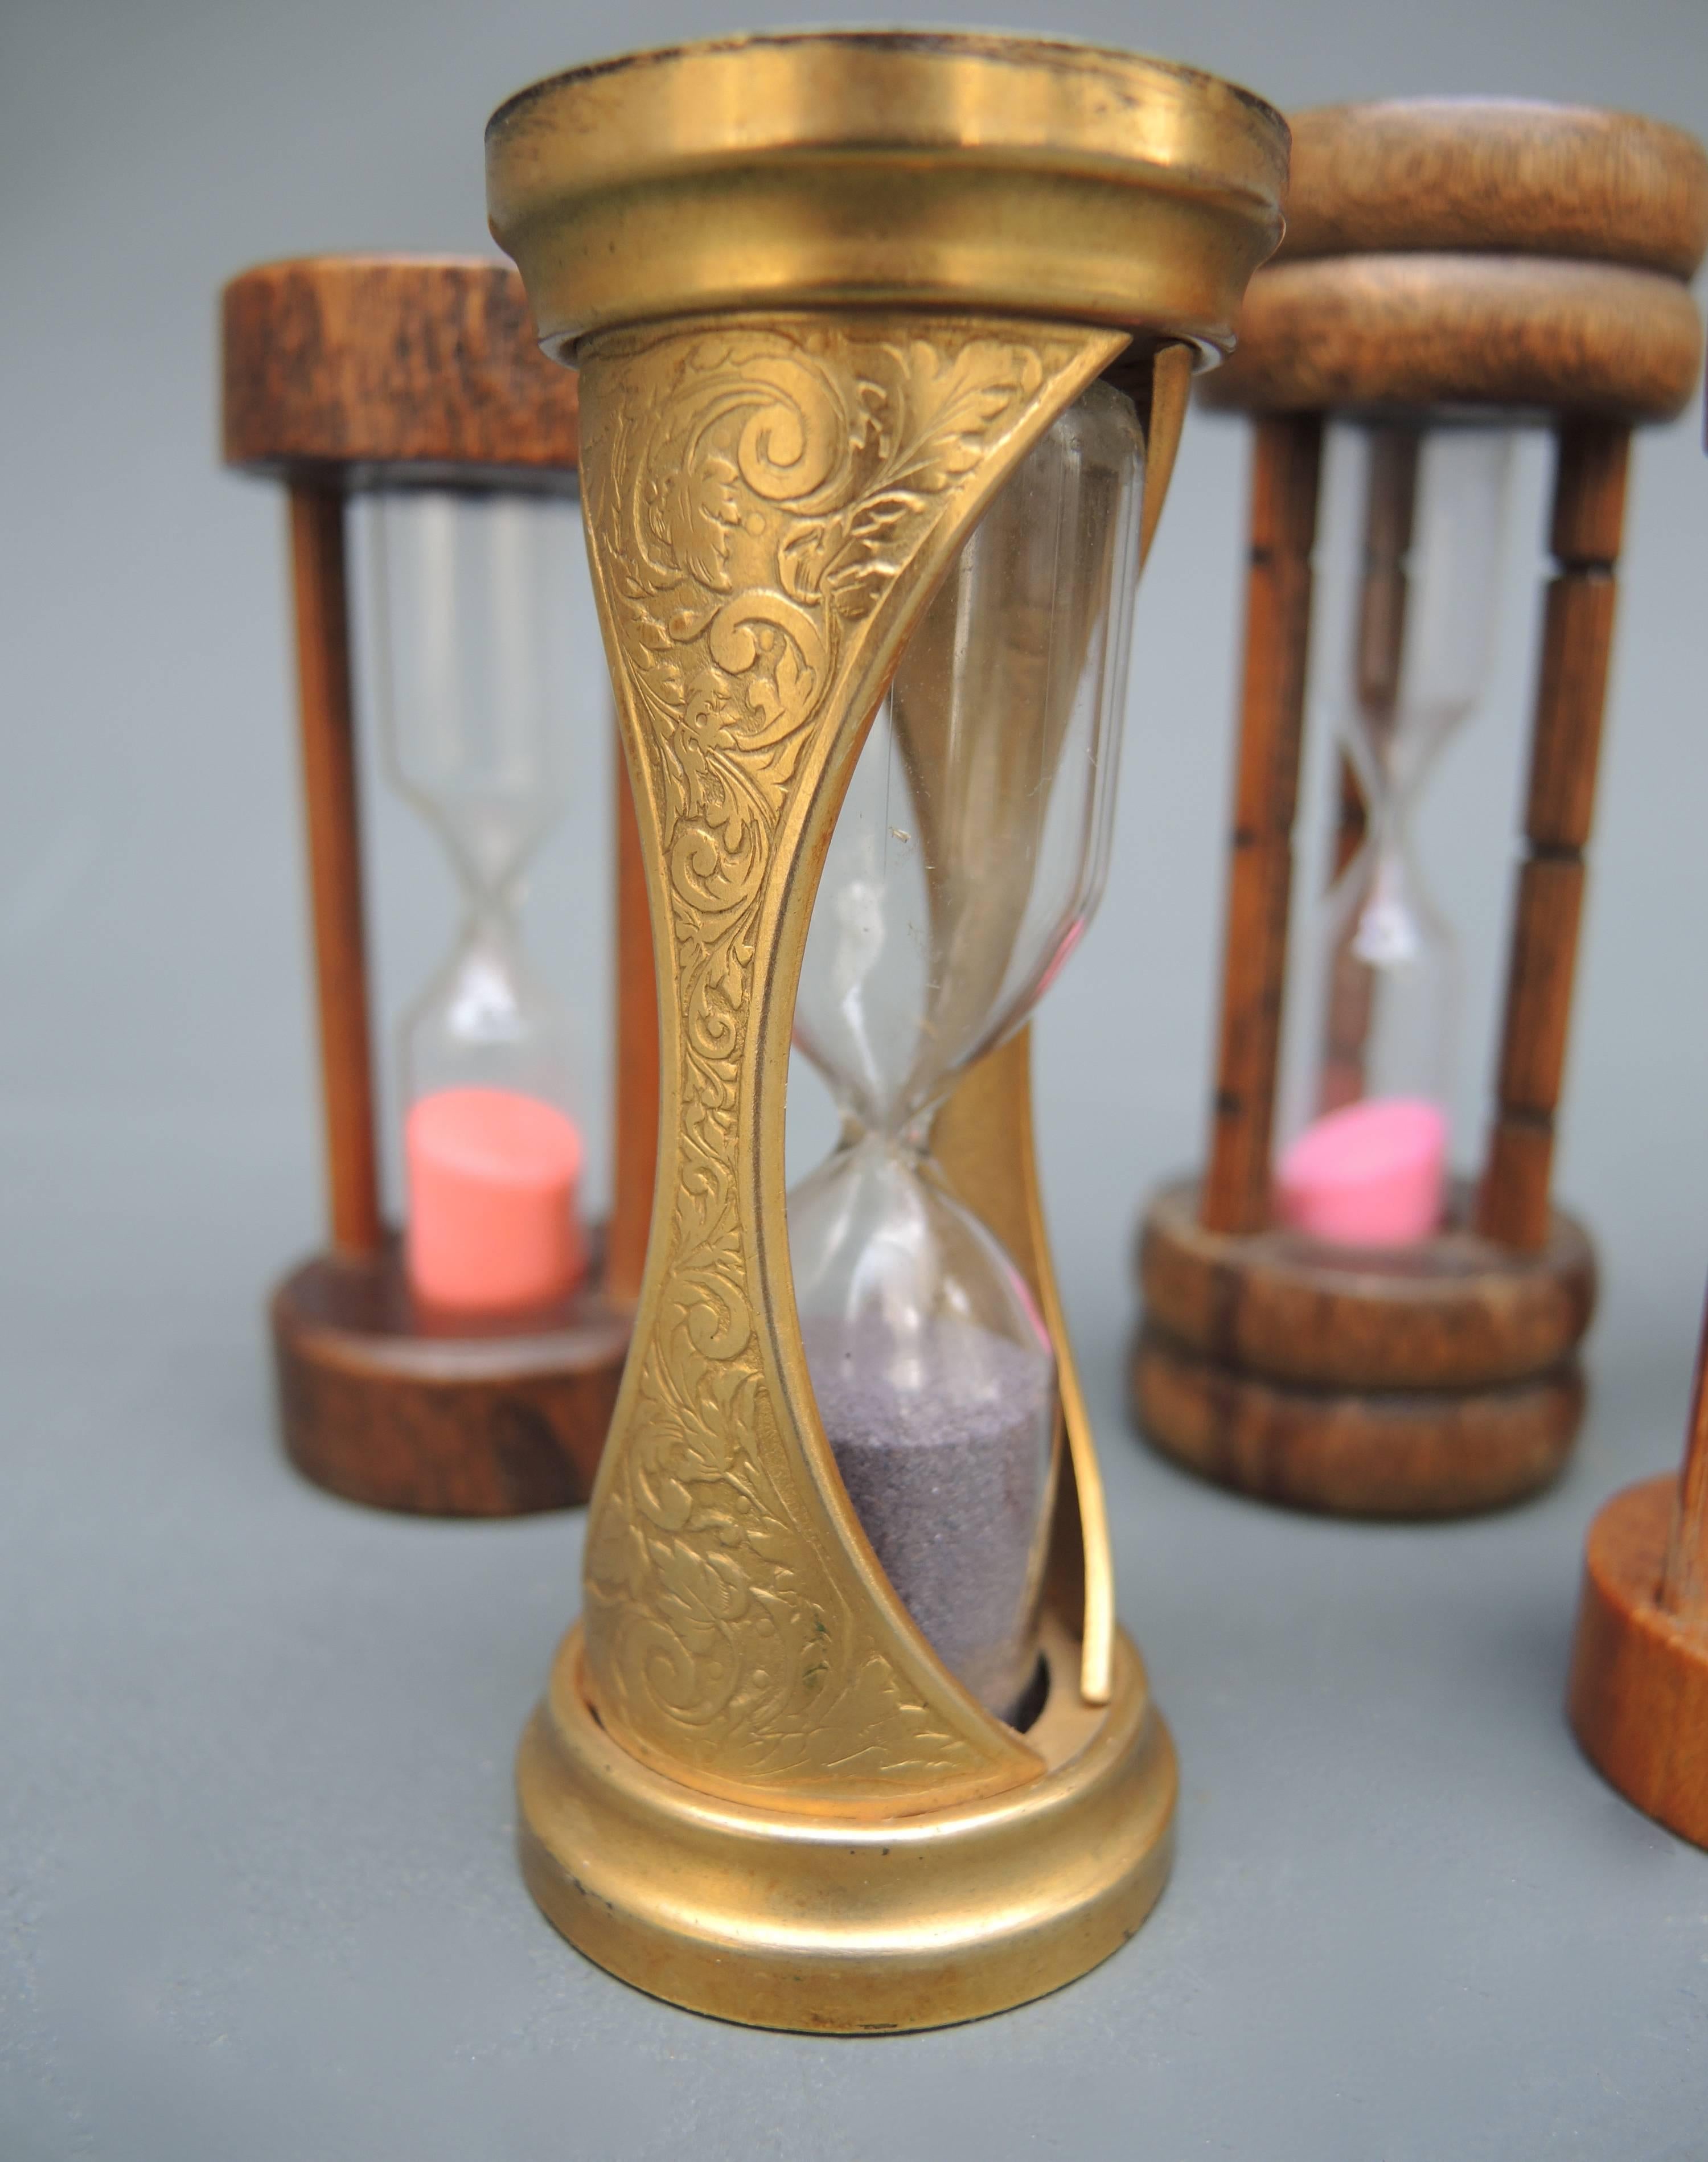 A collection of five sand timers in glass and wood; brass, oak, birch and fruitwood. The sand in each is a different color making for an attractive collection for a desk, bookshelf or kitchen
Measuring: 8.50-10 cm high.